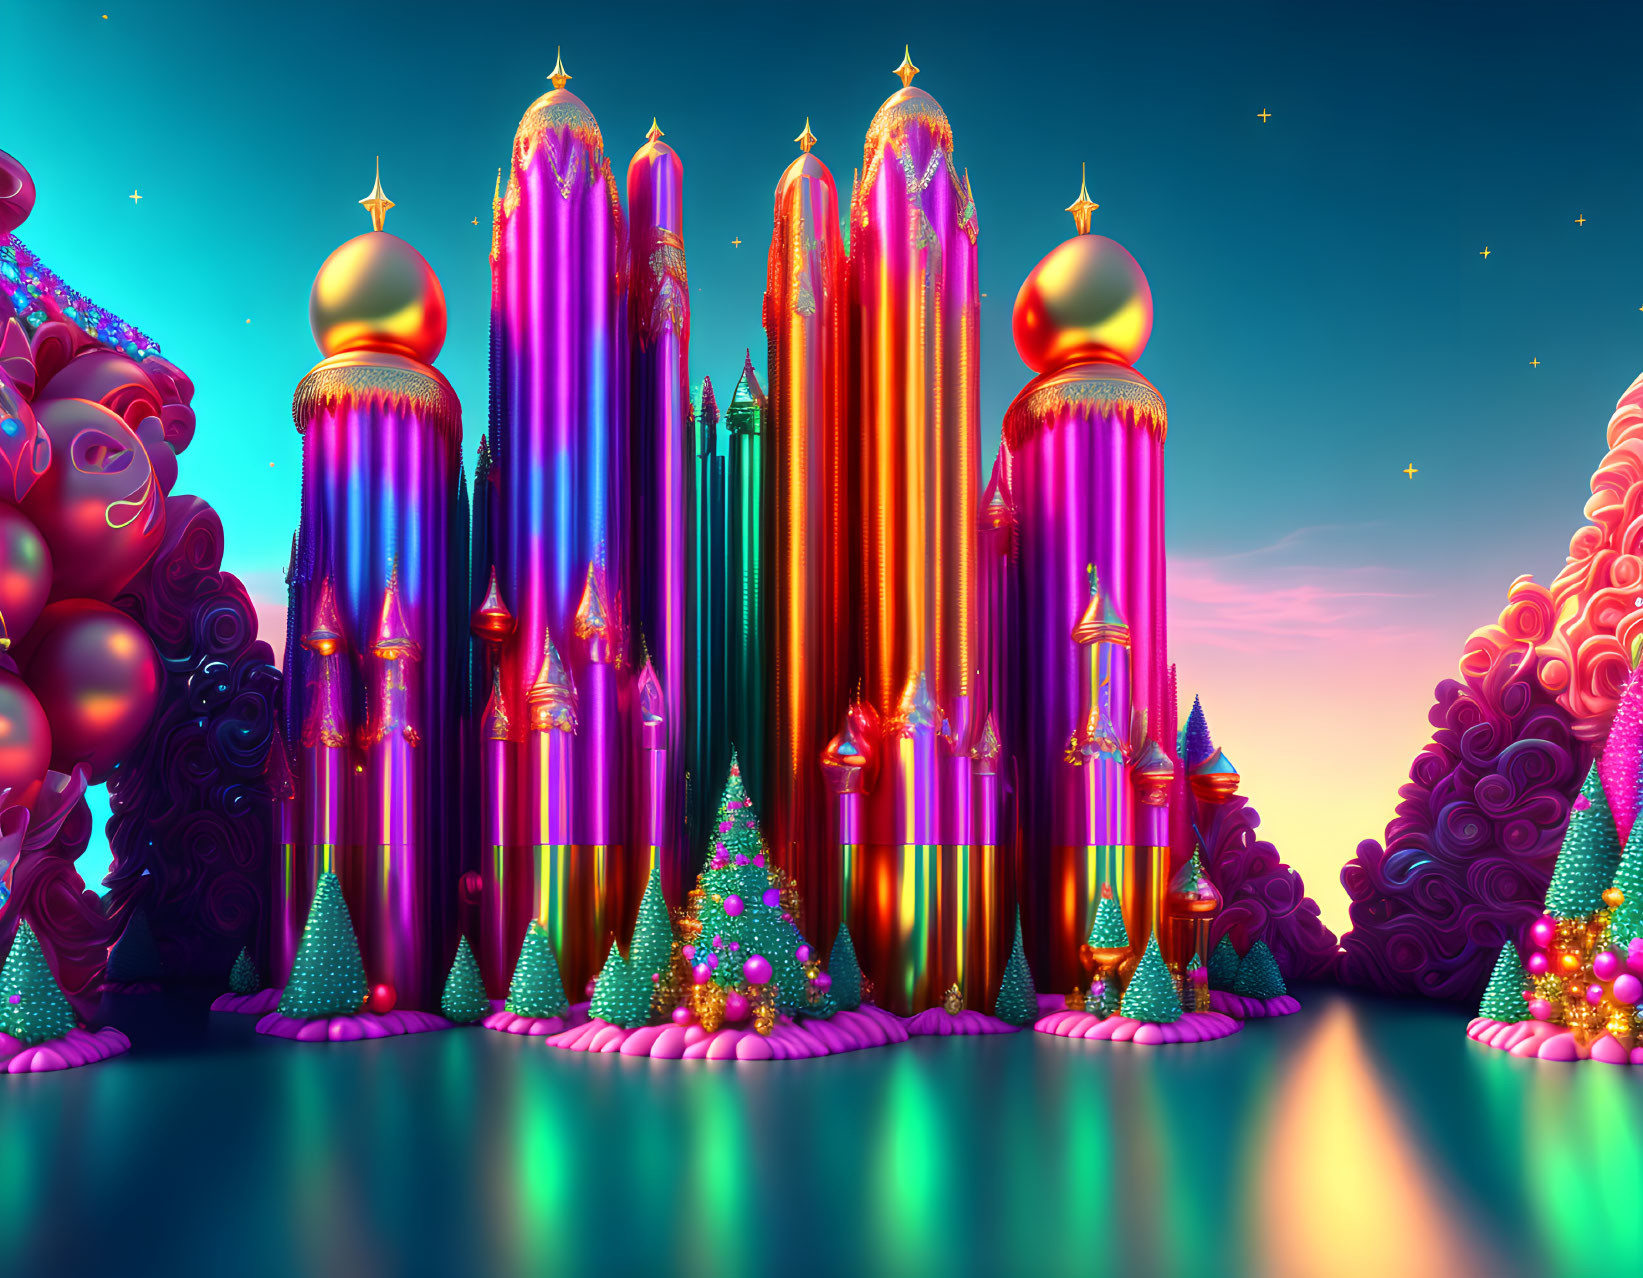 Whimsical colorful towers in a fantasy landscape at twilight